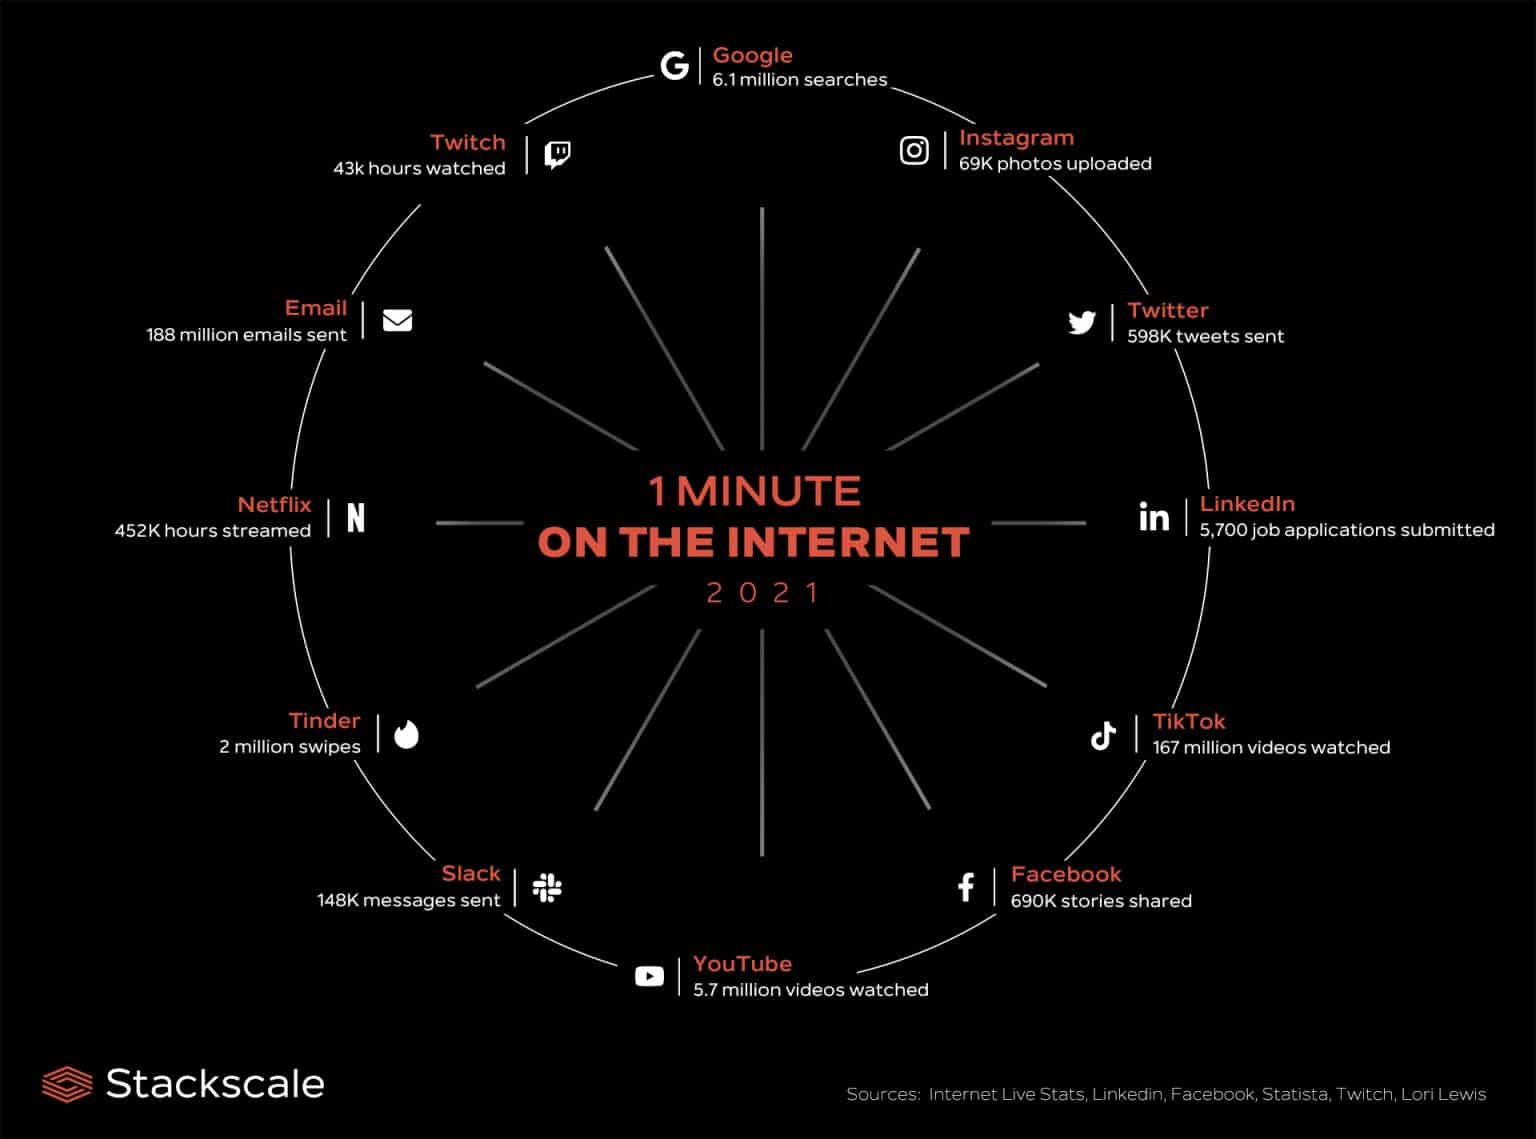 One minute on the Internet 2021